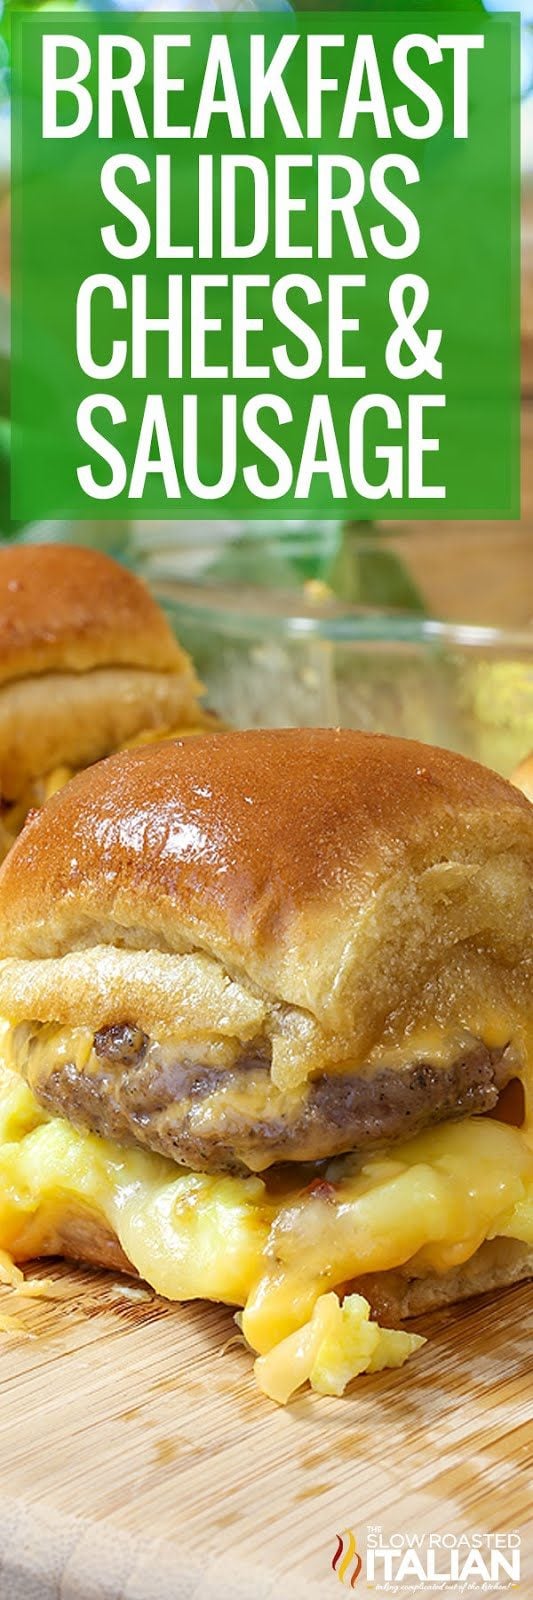 titled image (and shown): cheese and sausage breakfast sliders